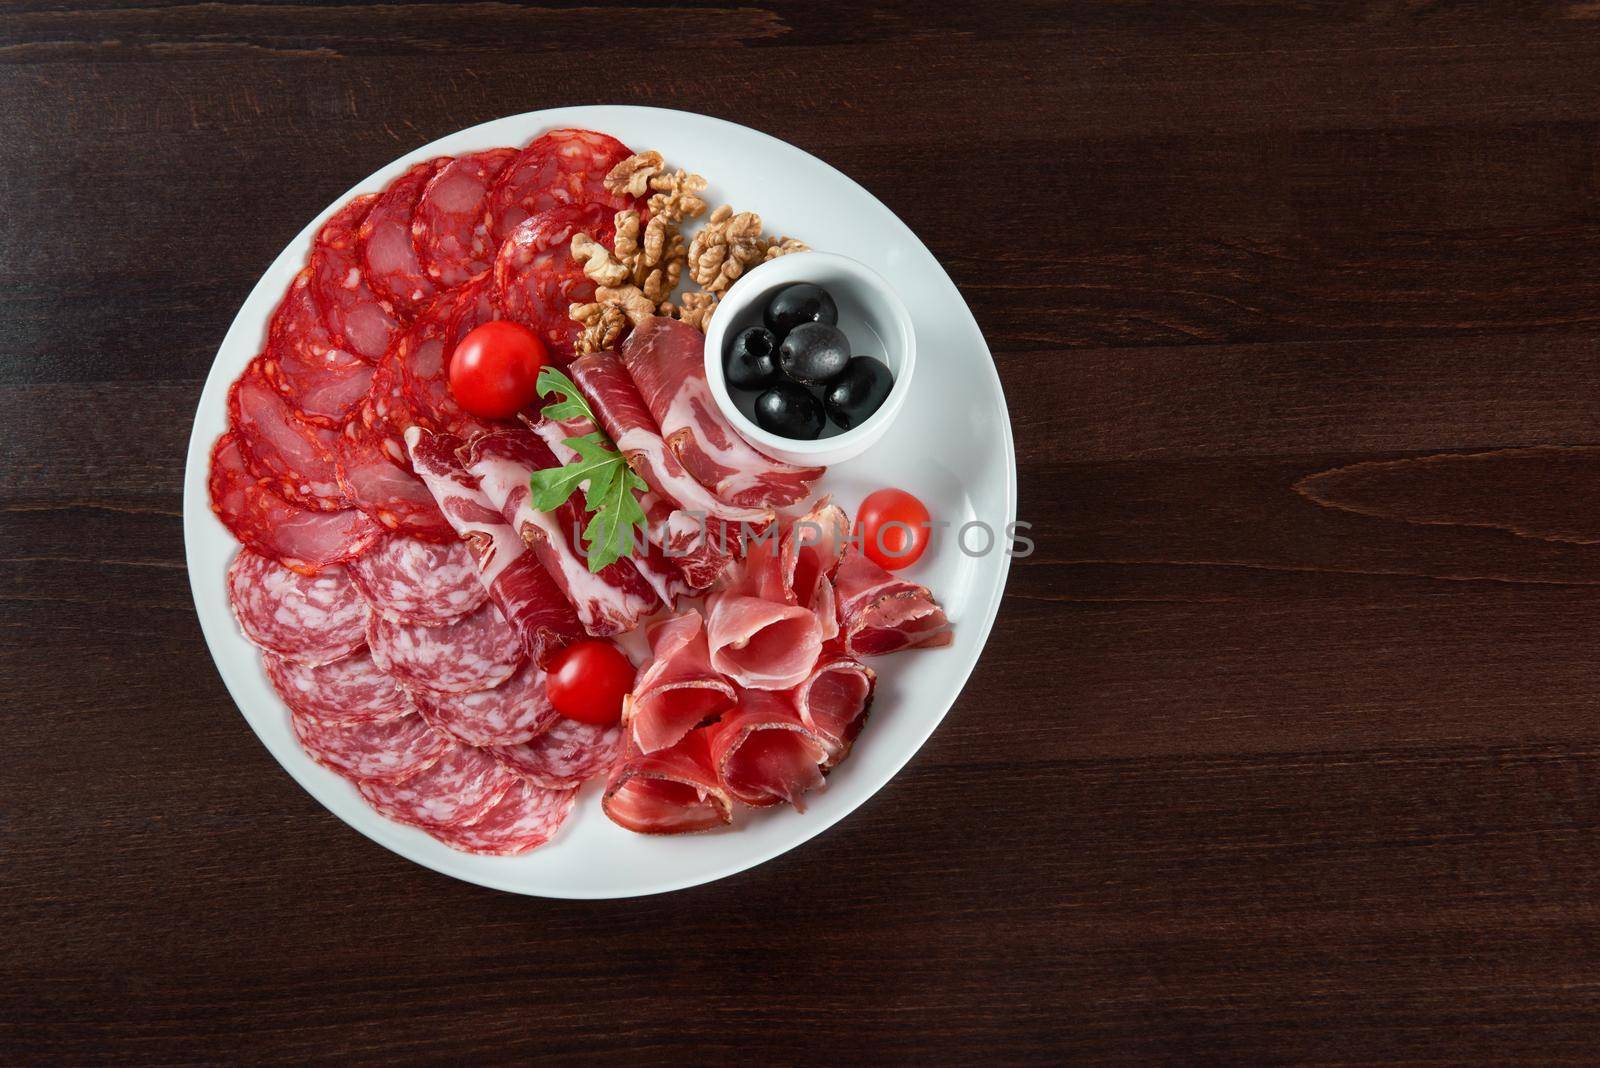 Salami appetizers. Sliced salami and ham of different kinds served on a plate with cherry tomatoes walnuts and black olives food concept top view copyspace